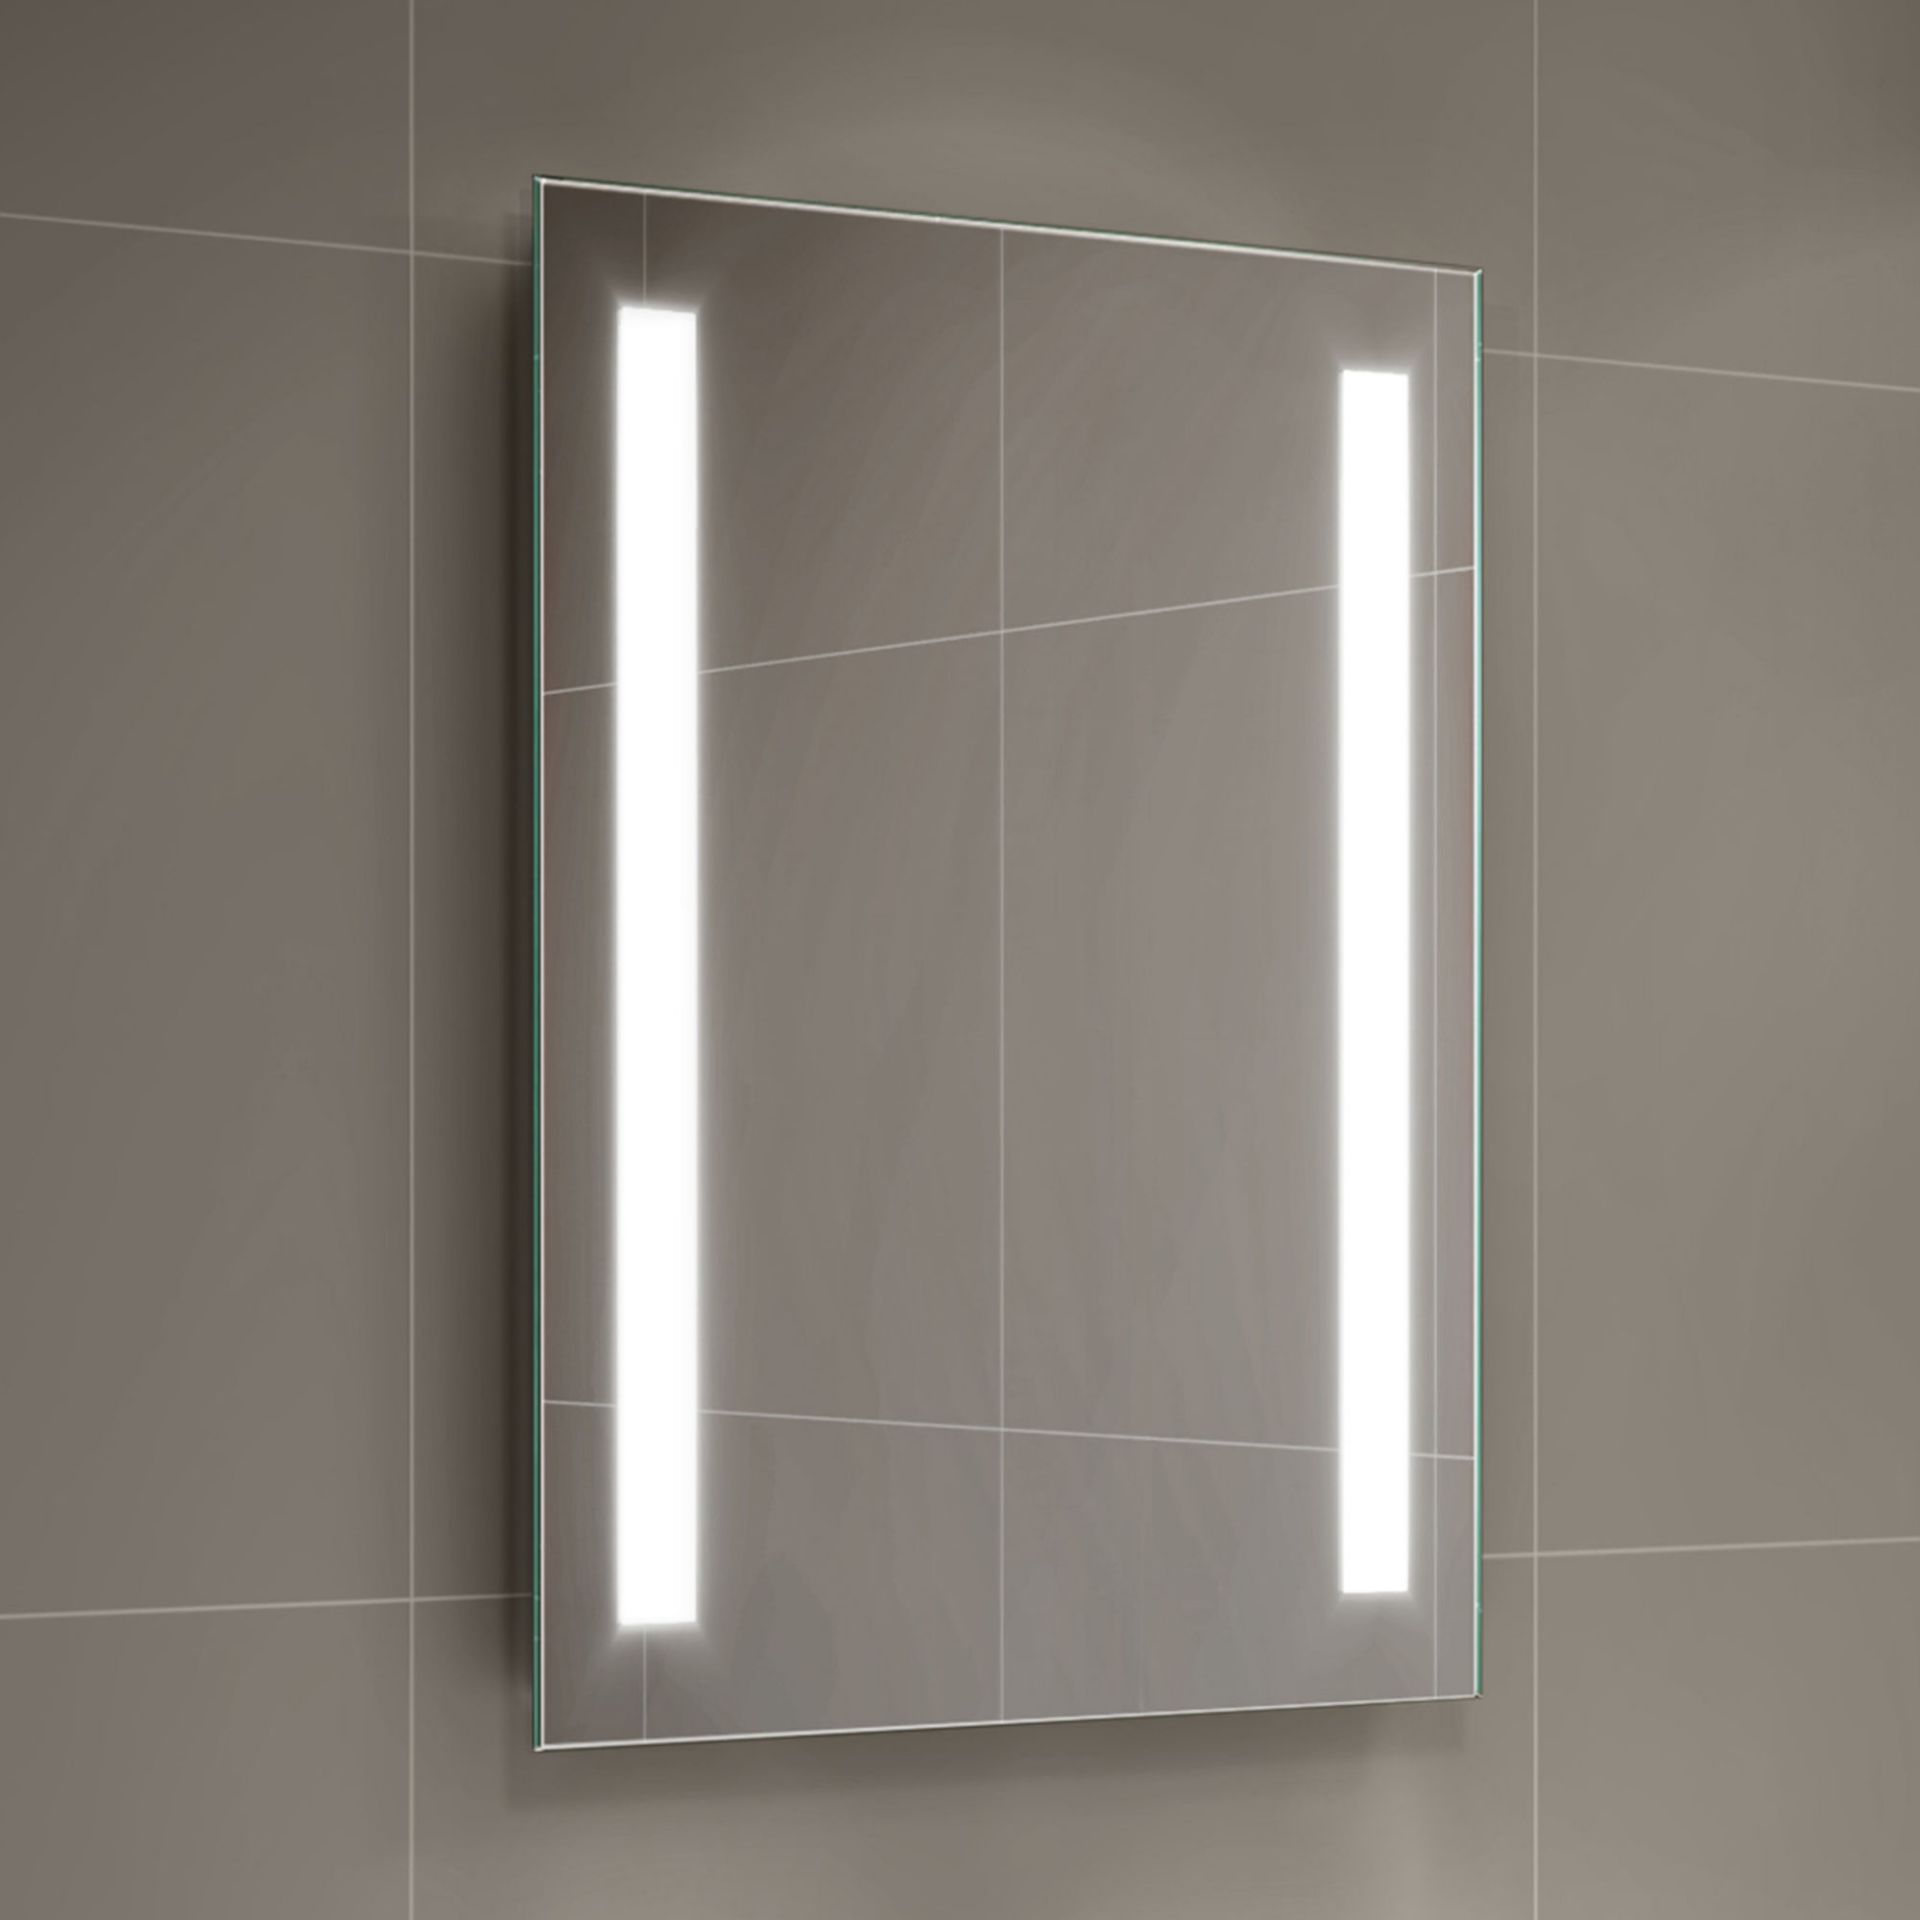 (KR213) 500x700mm Omega Illuminated LED Mirror - Battery Operated. Energy saving controlled On / Off